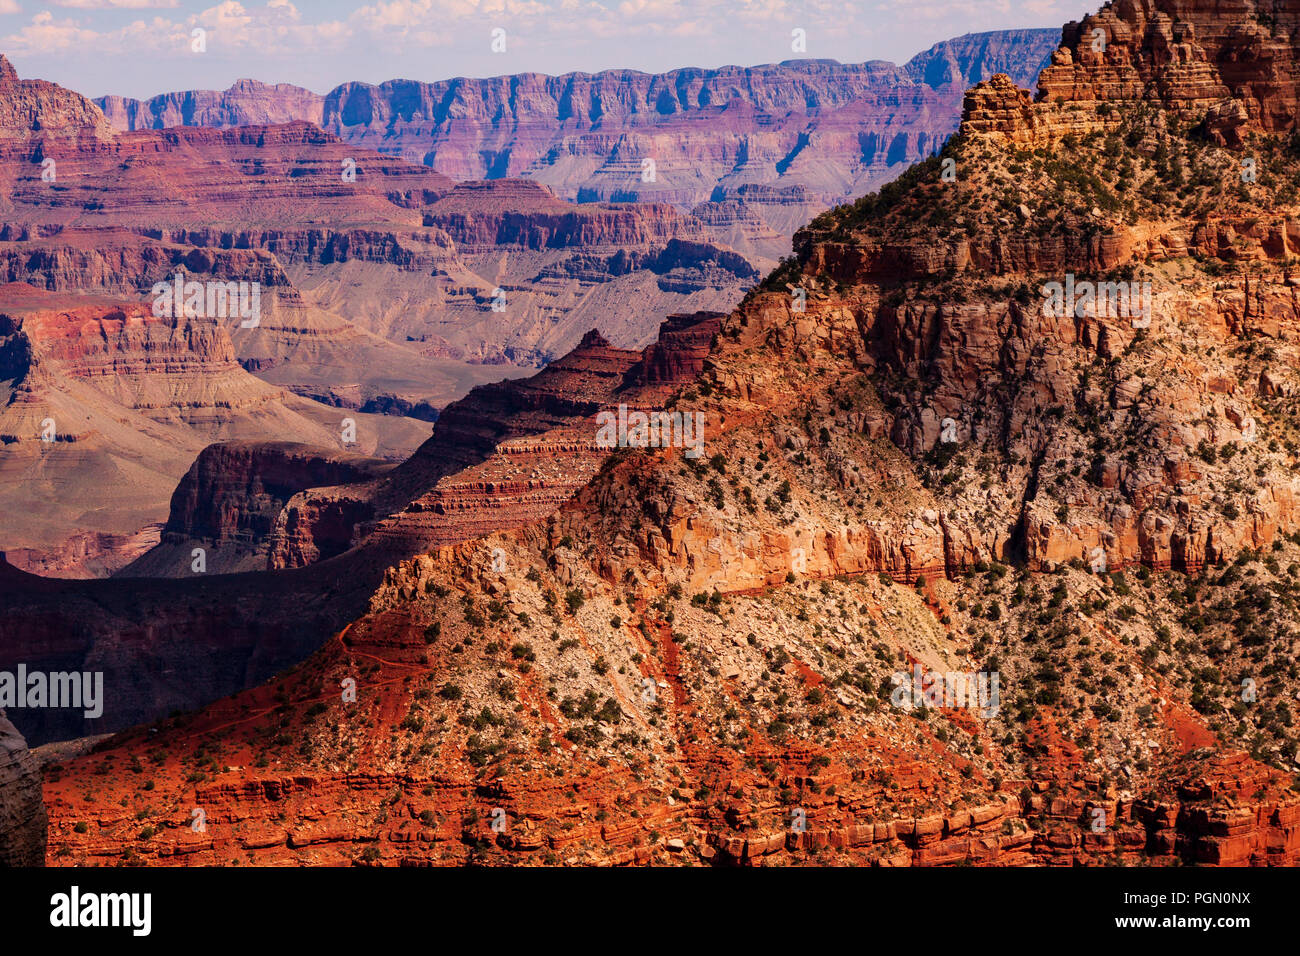 Rolling Landscape at Grand Canyon National Park Stock Photo - Alamy